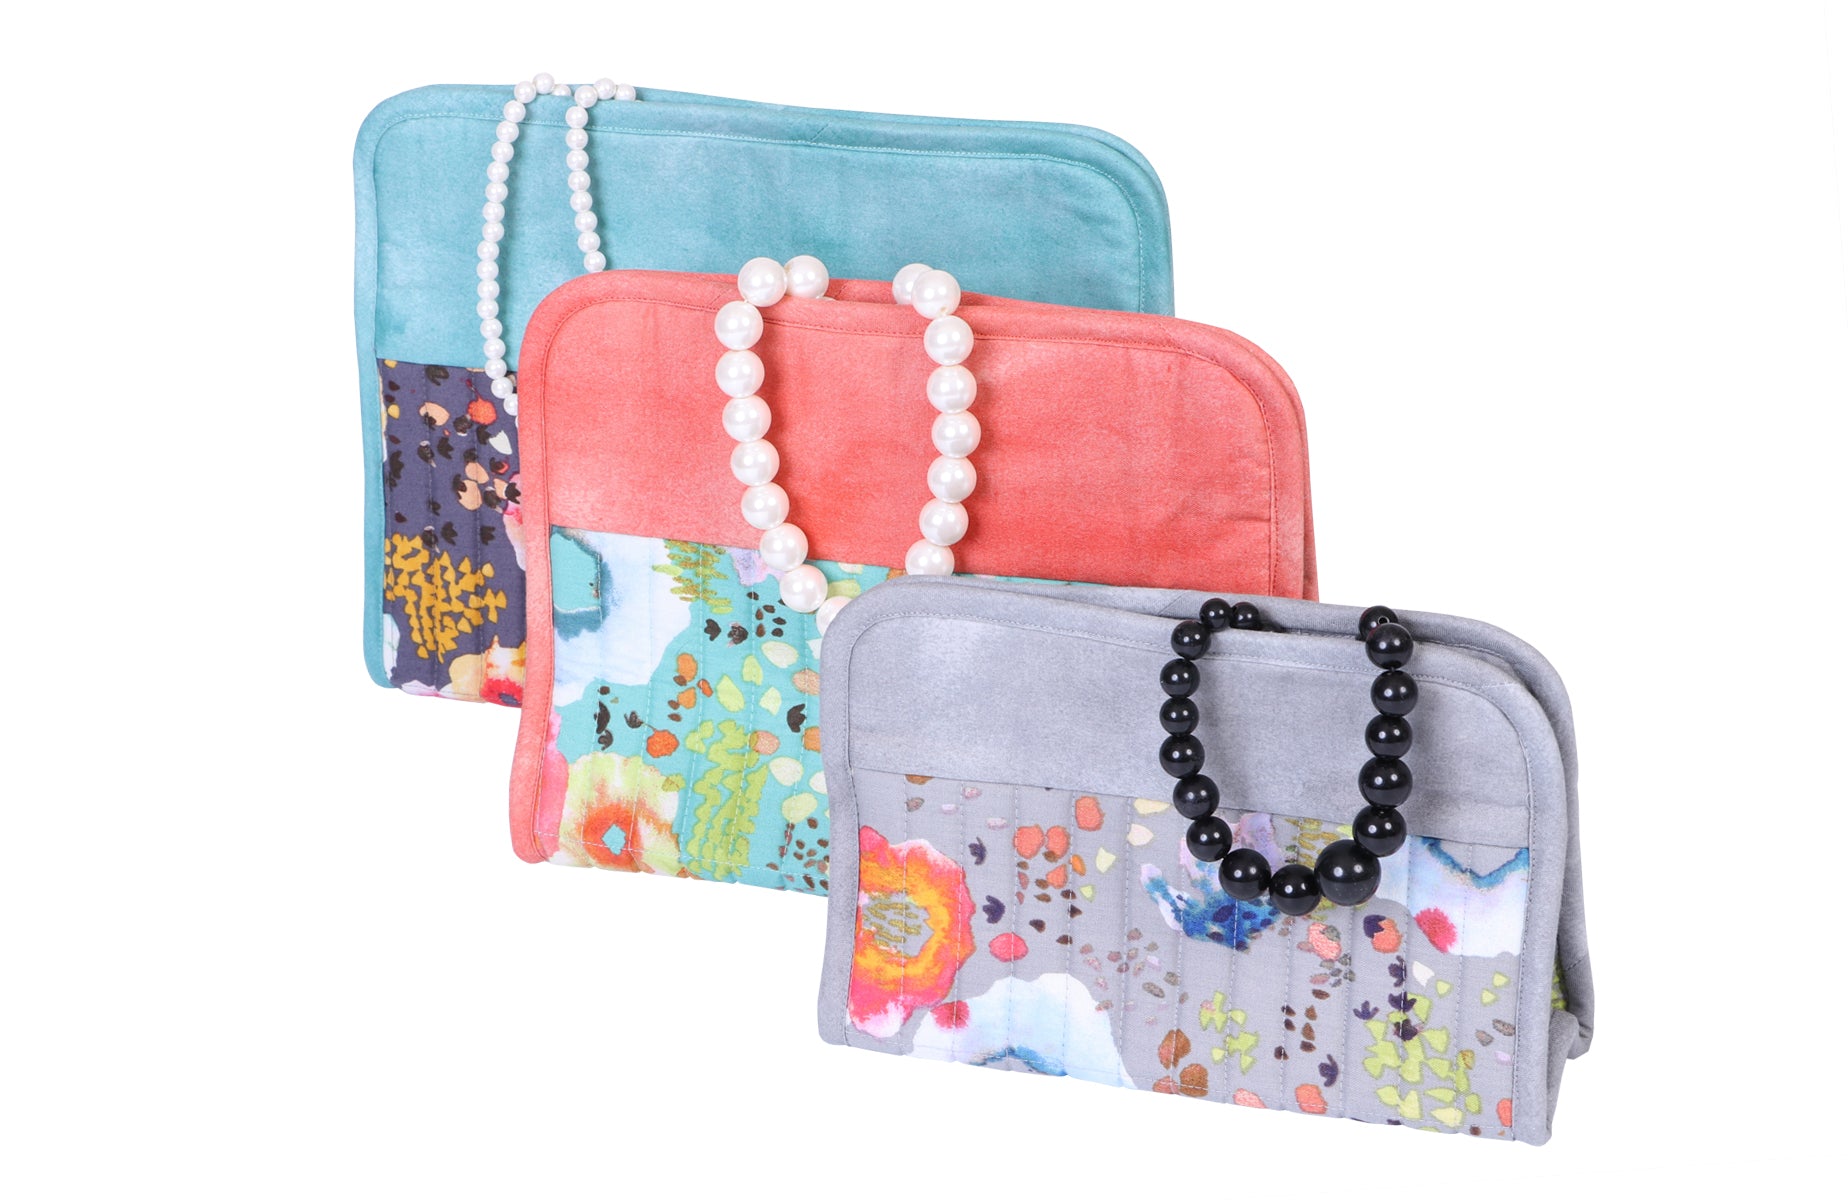 Cosmetics Clutches - by Annie